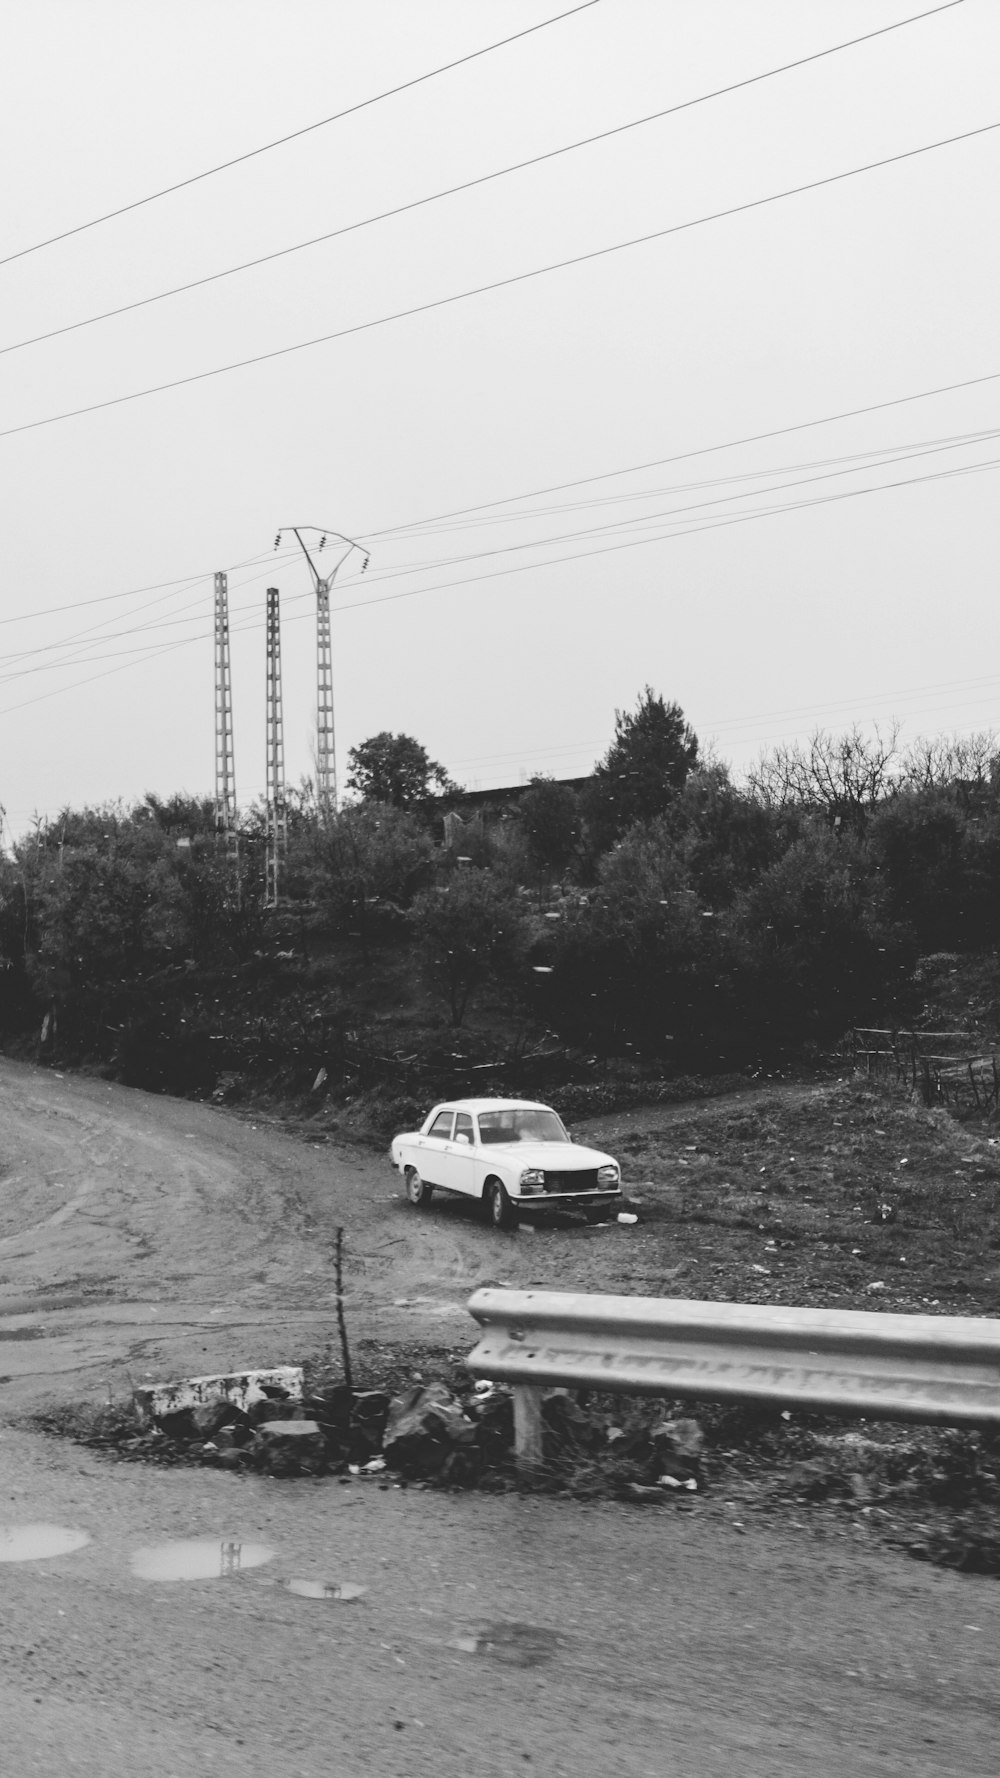 a car driving down a dirt road next to power lines